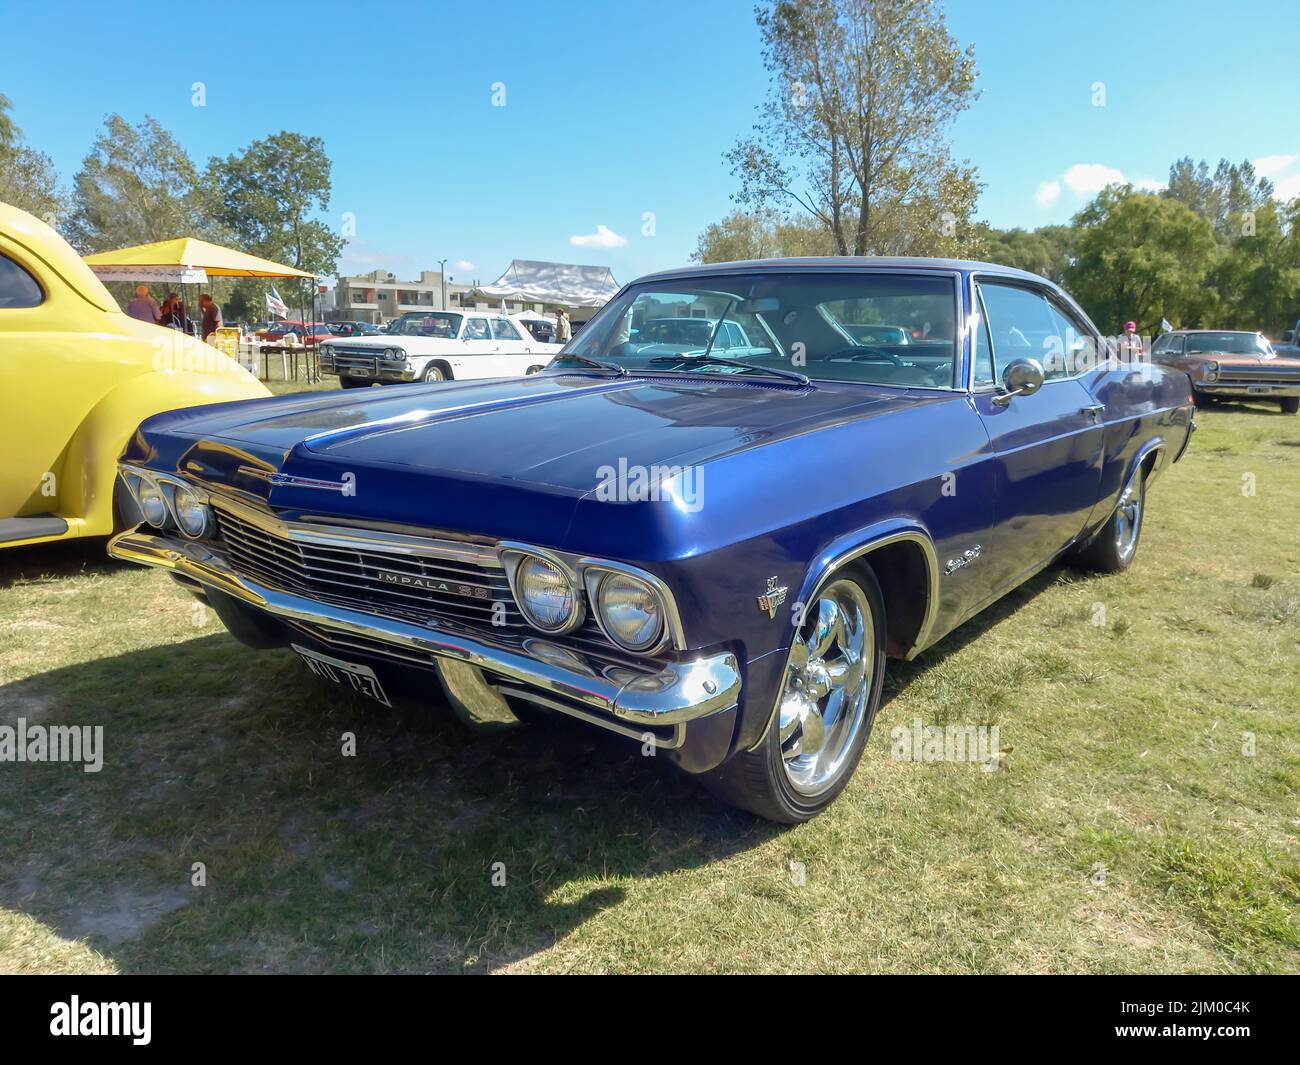 Chascomus, Argentina - Apr 09, 2022: old popular blue Chevrolet Chevy Impala SS Super Sport V8 327 two door hardtop coupe 1964 by GM in the countrysid Stock Photo